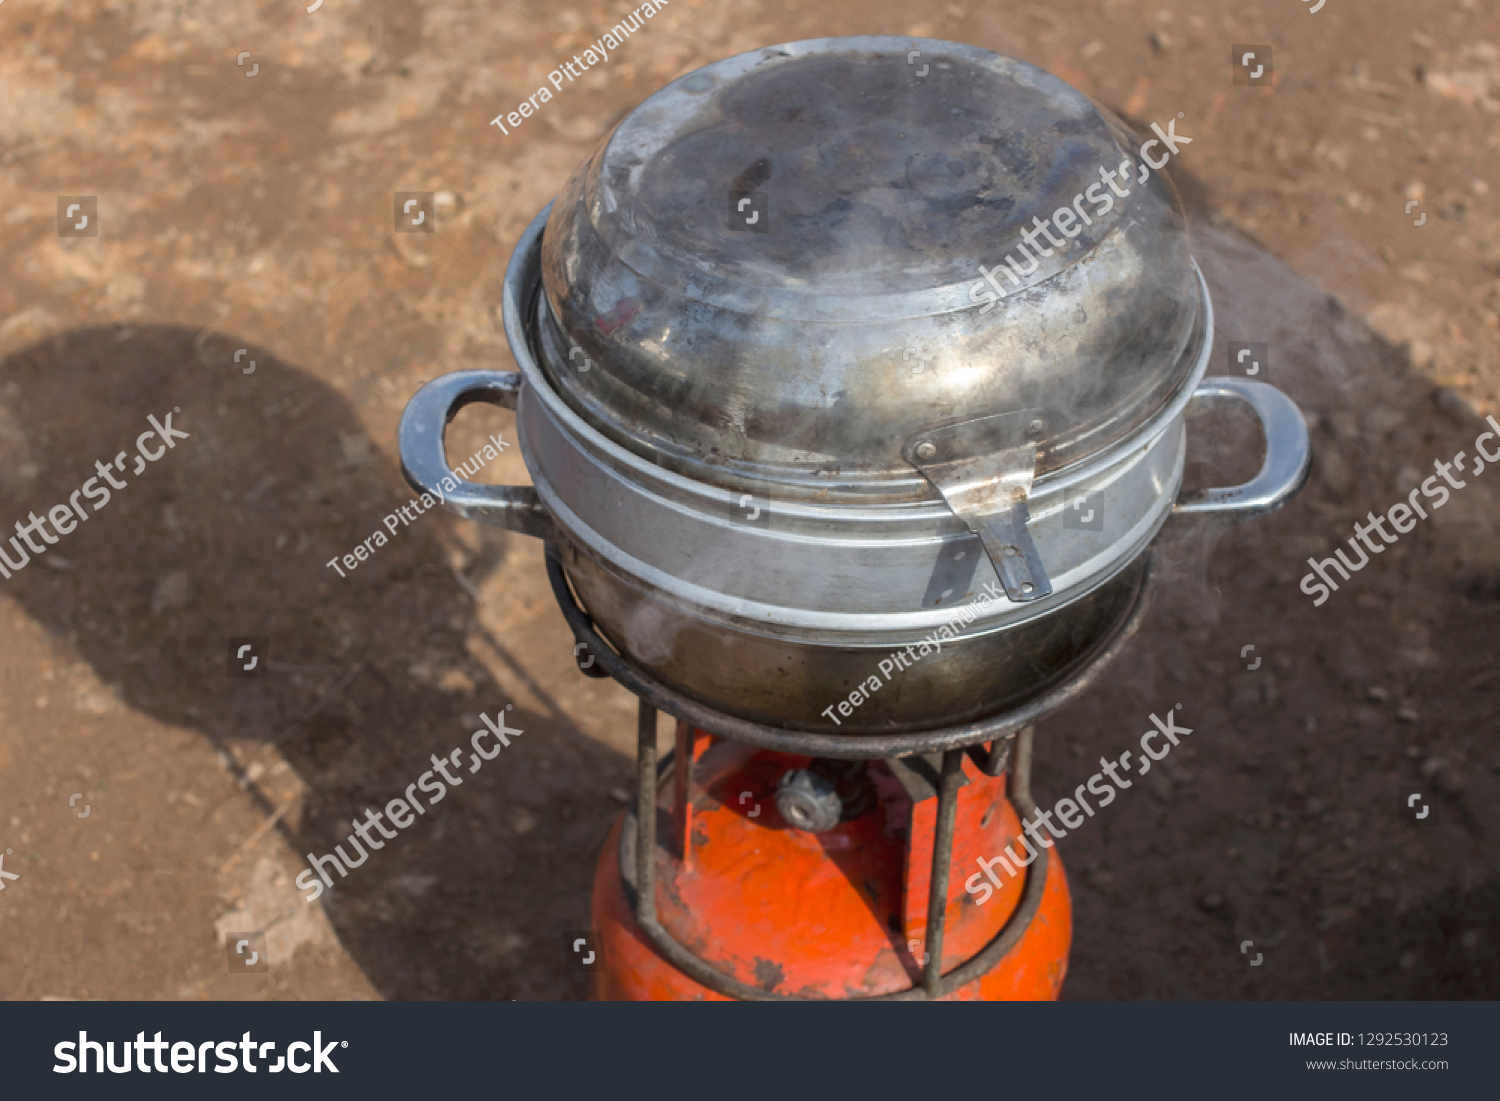 Cook Rice On Gas Stove During Stock Photo Edit Now 1292530123